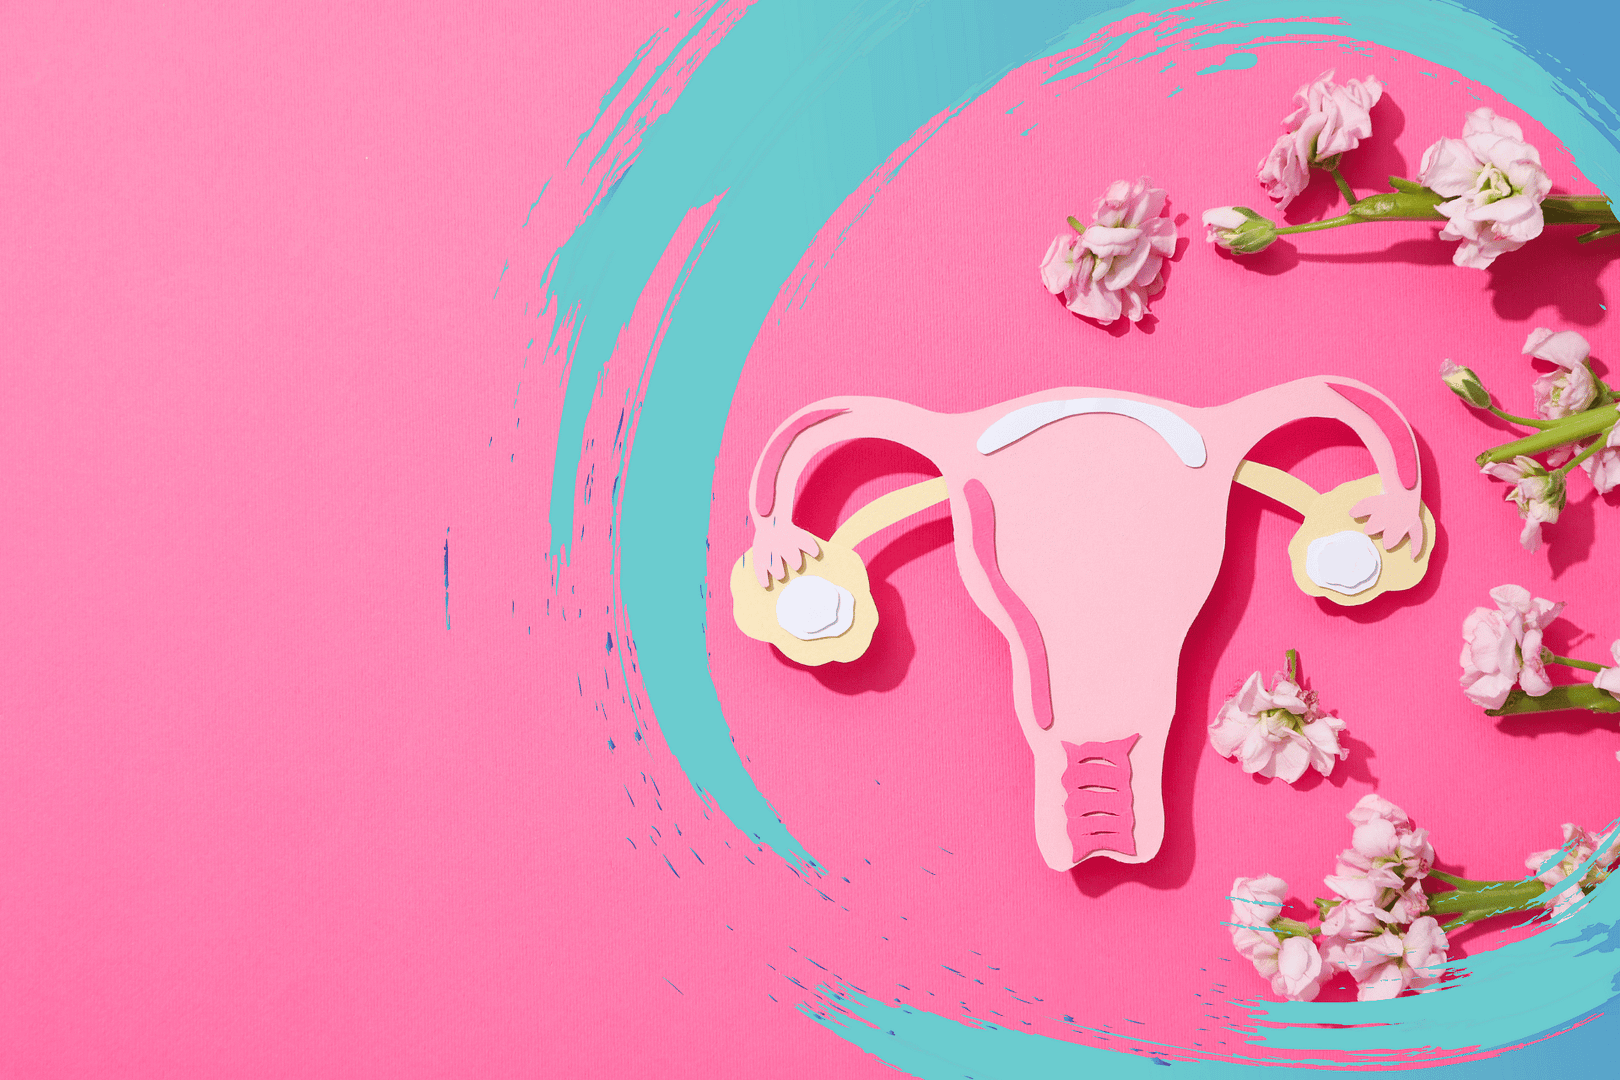 Pink cartoon drawing of uterus with flowers around it and a large swirl